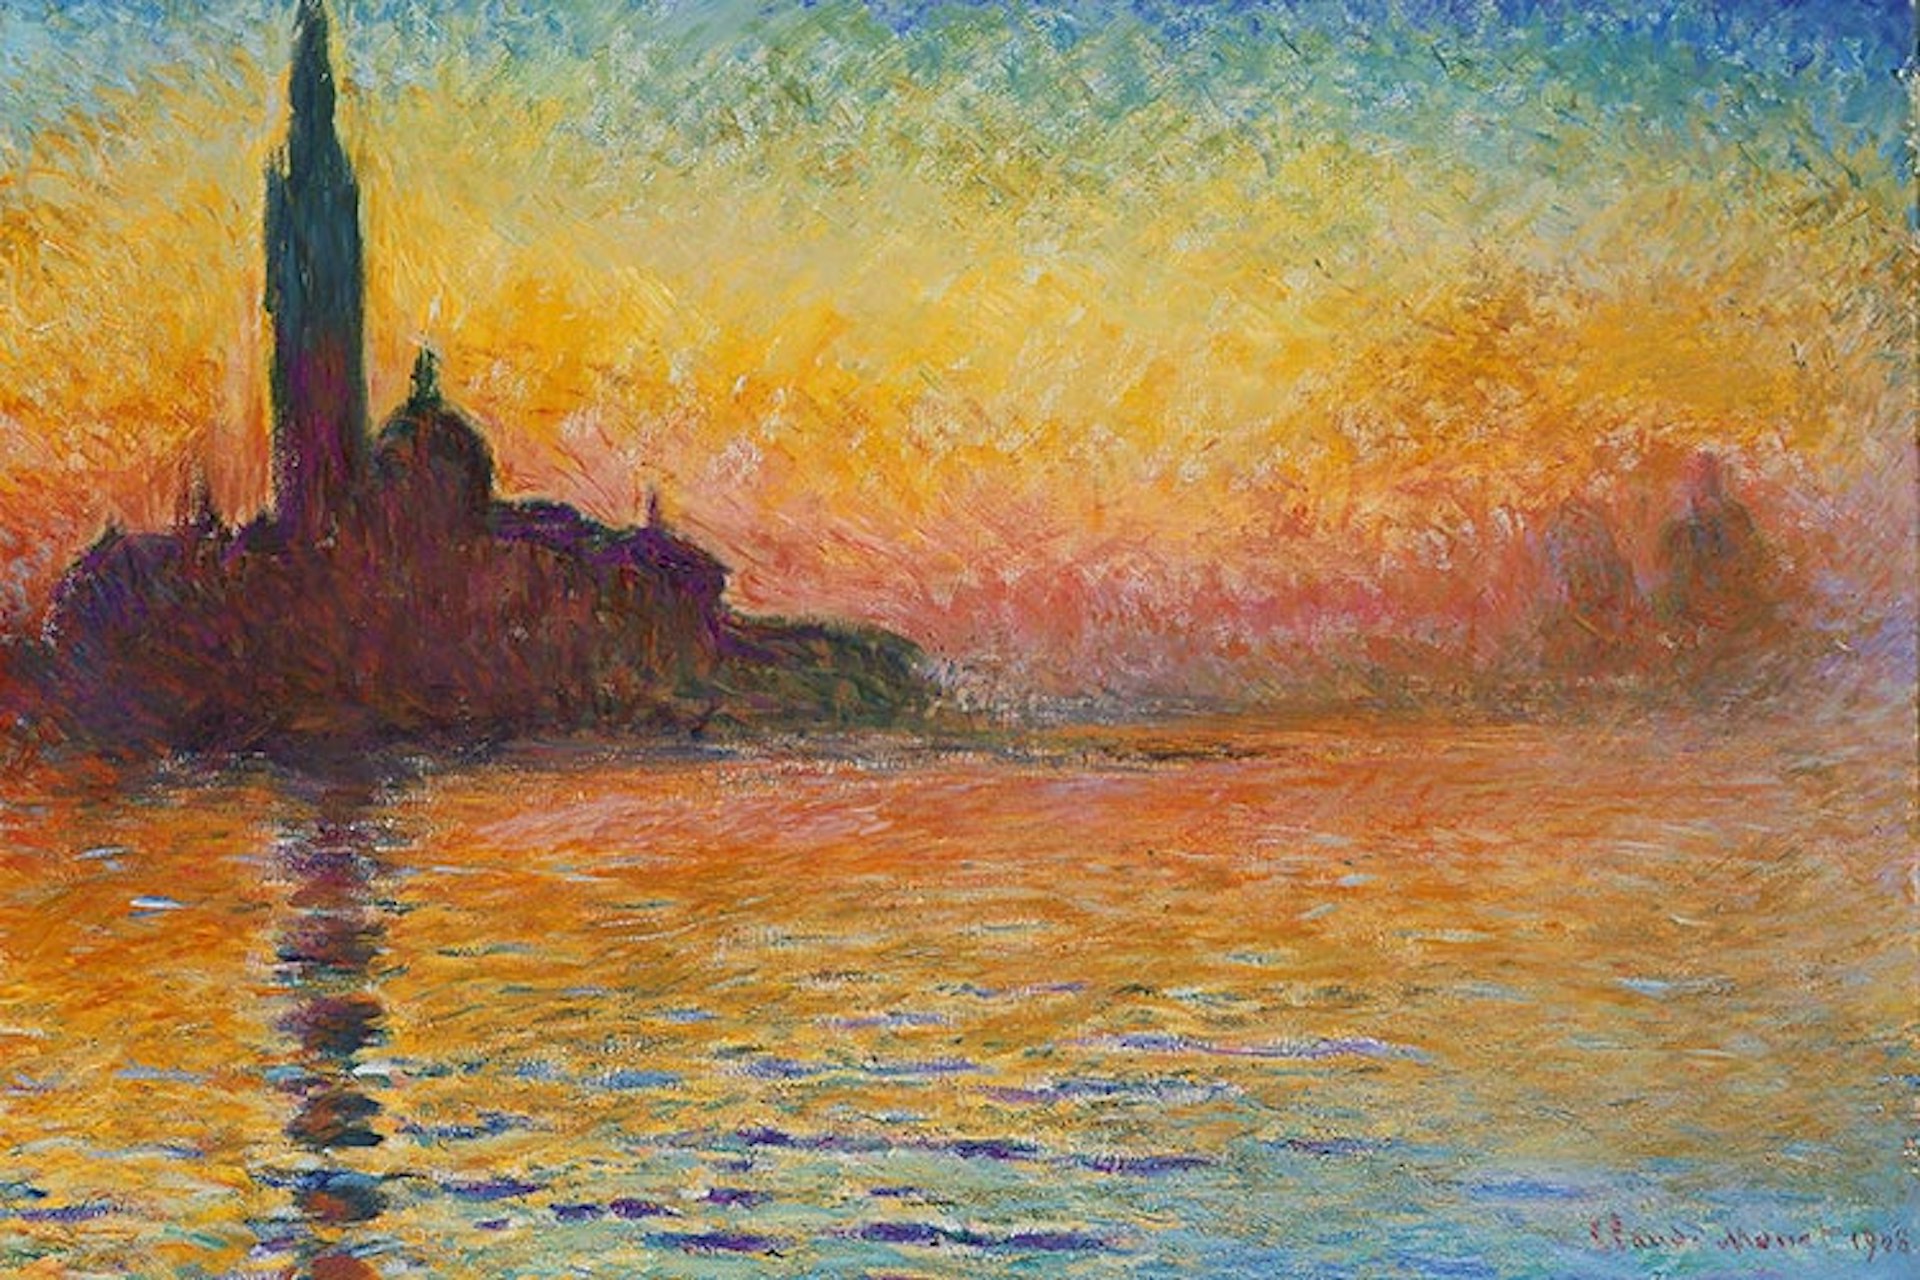 San Giorgio Maggiore by Twilight, one of Monet's many attempts to conjure up Venice. Image from Wikimedia Commons